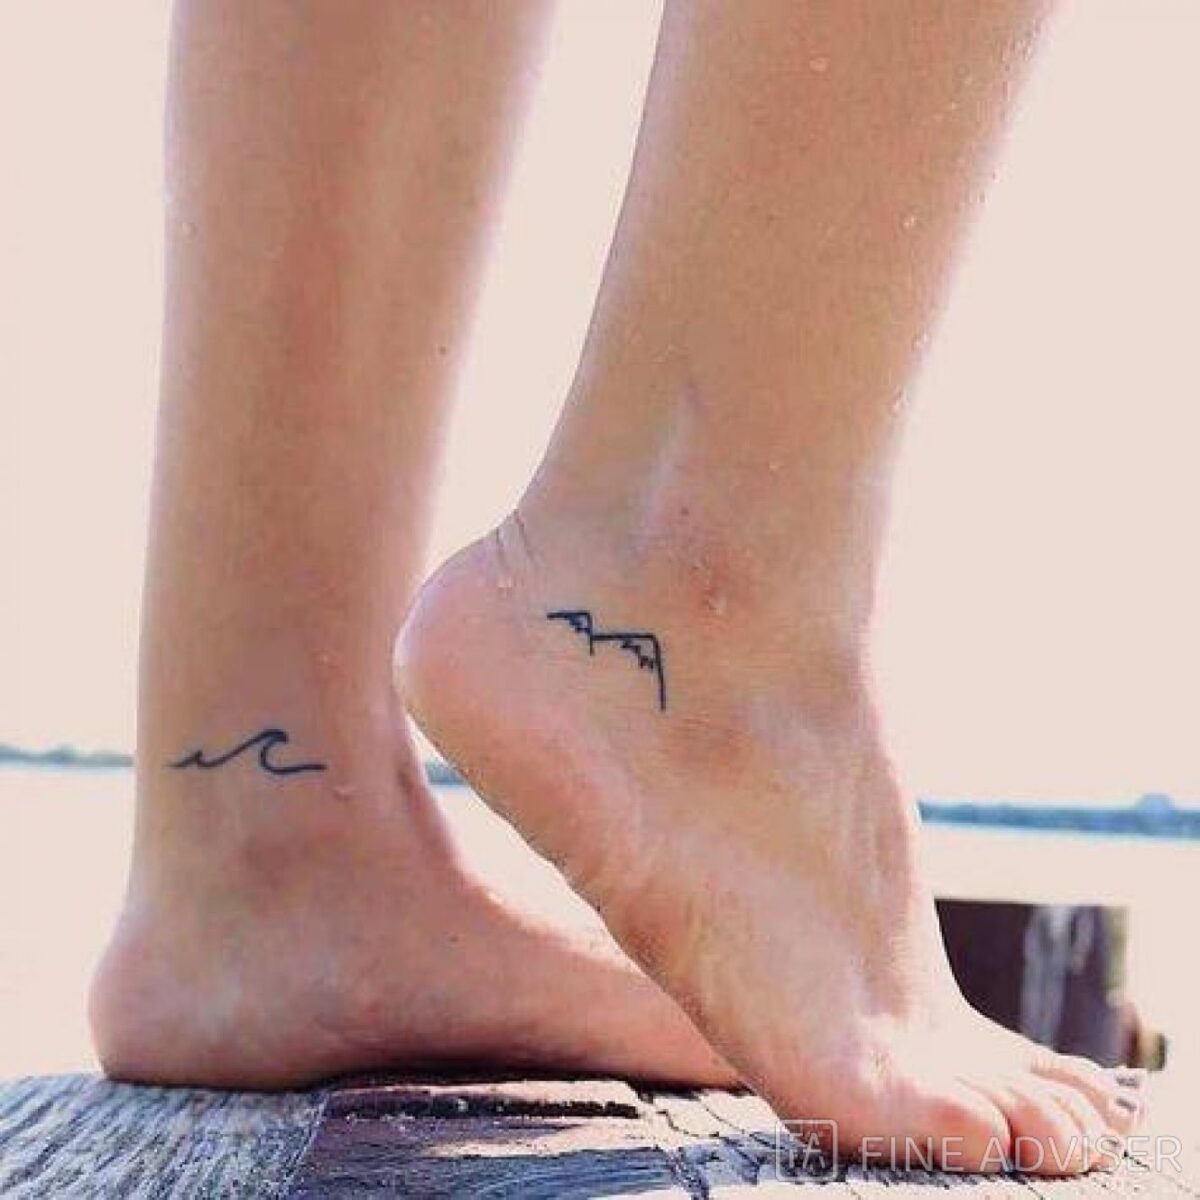 Mountains On Ankle4